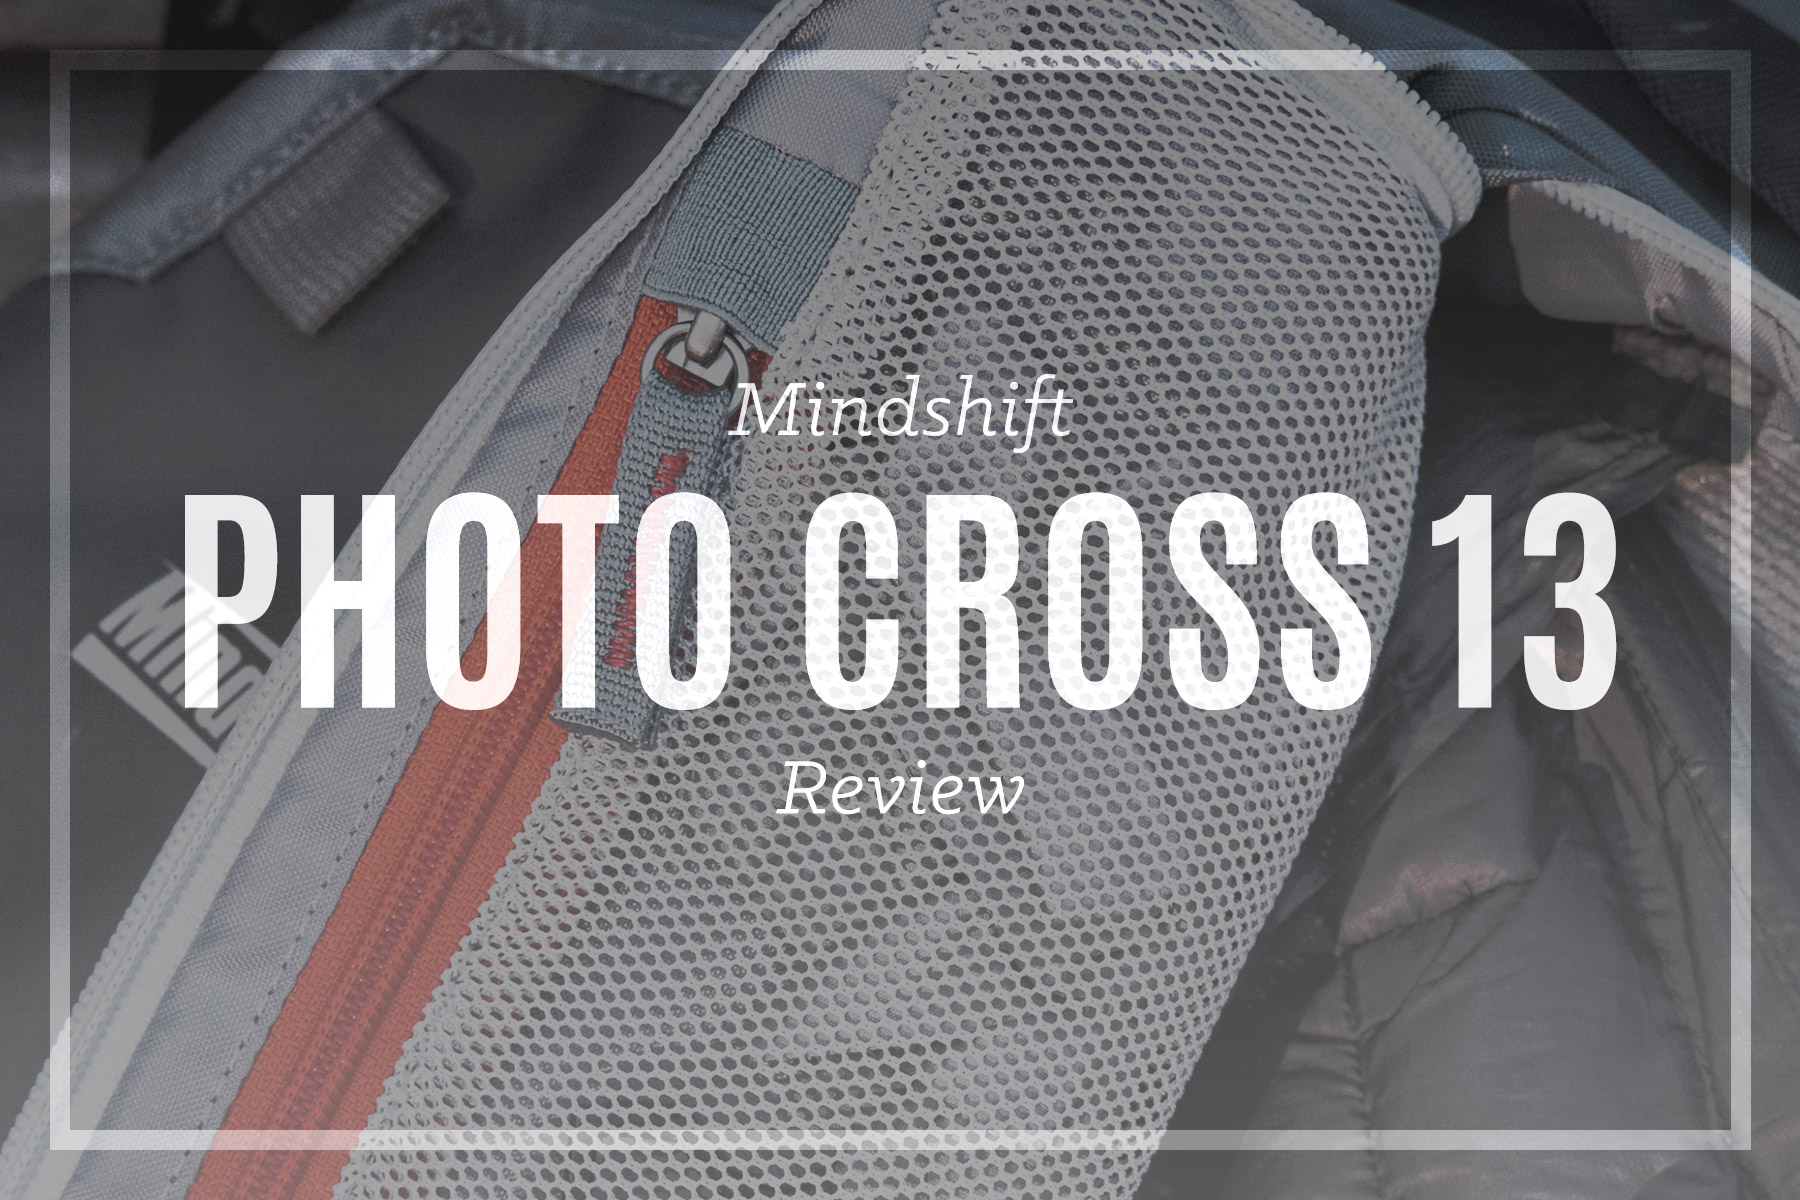 Mindshift Photocross 13 Review